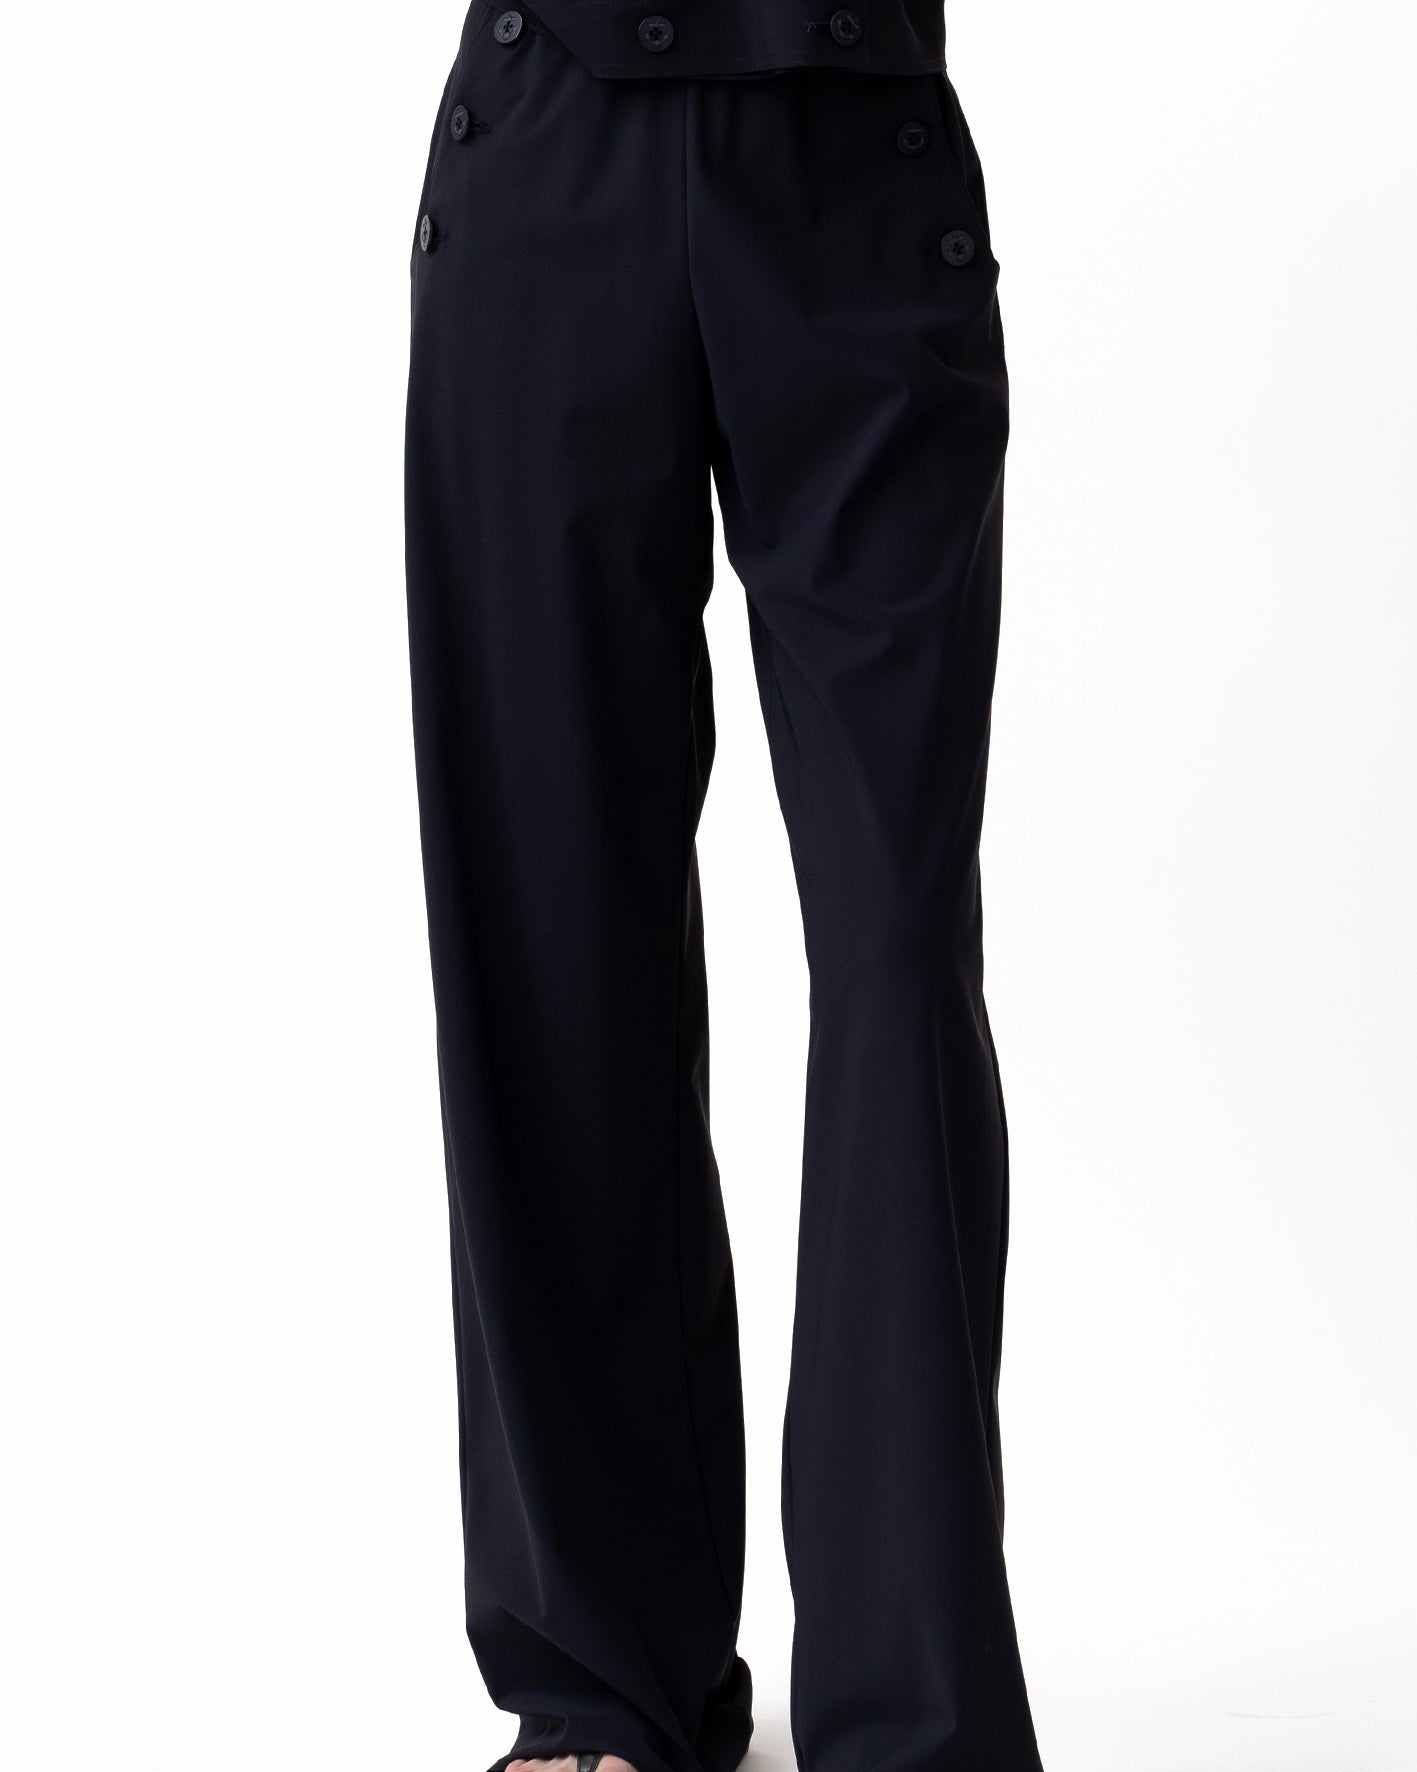 SAILOR TROUSERS, Navy